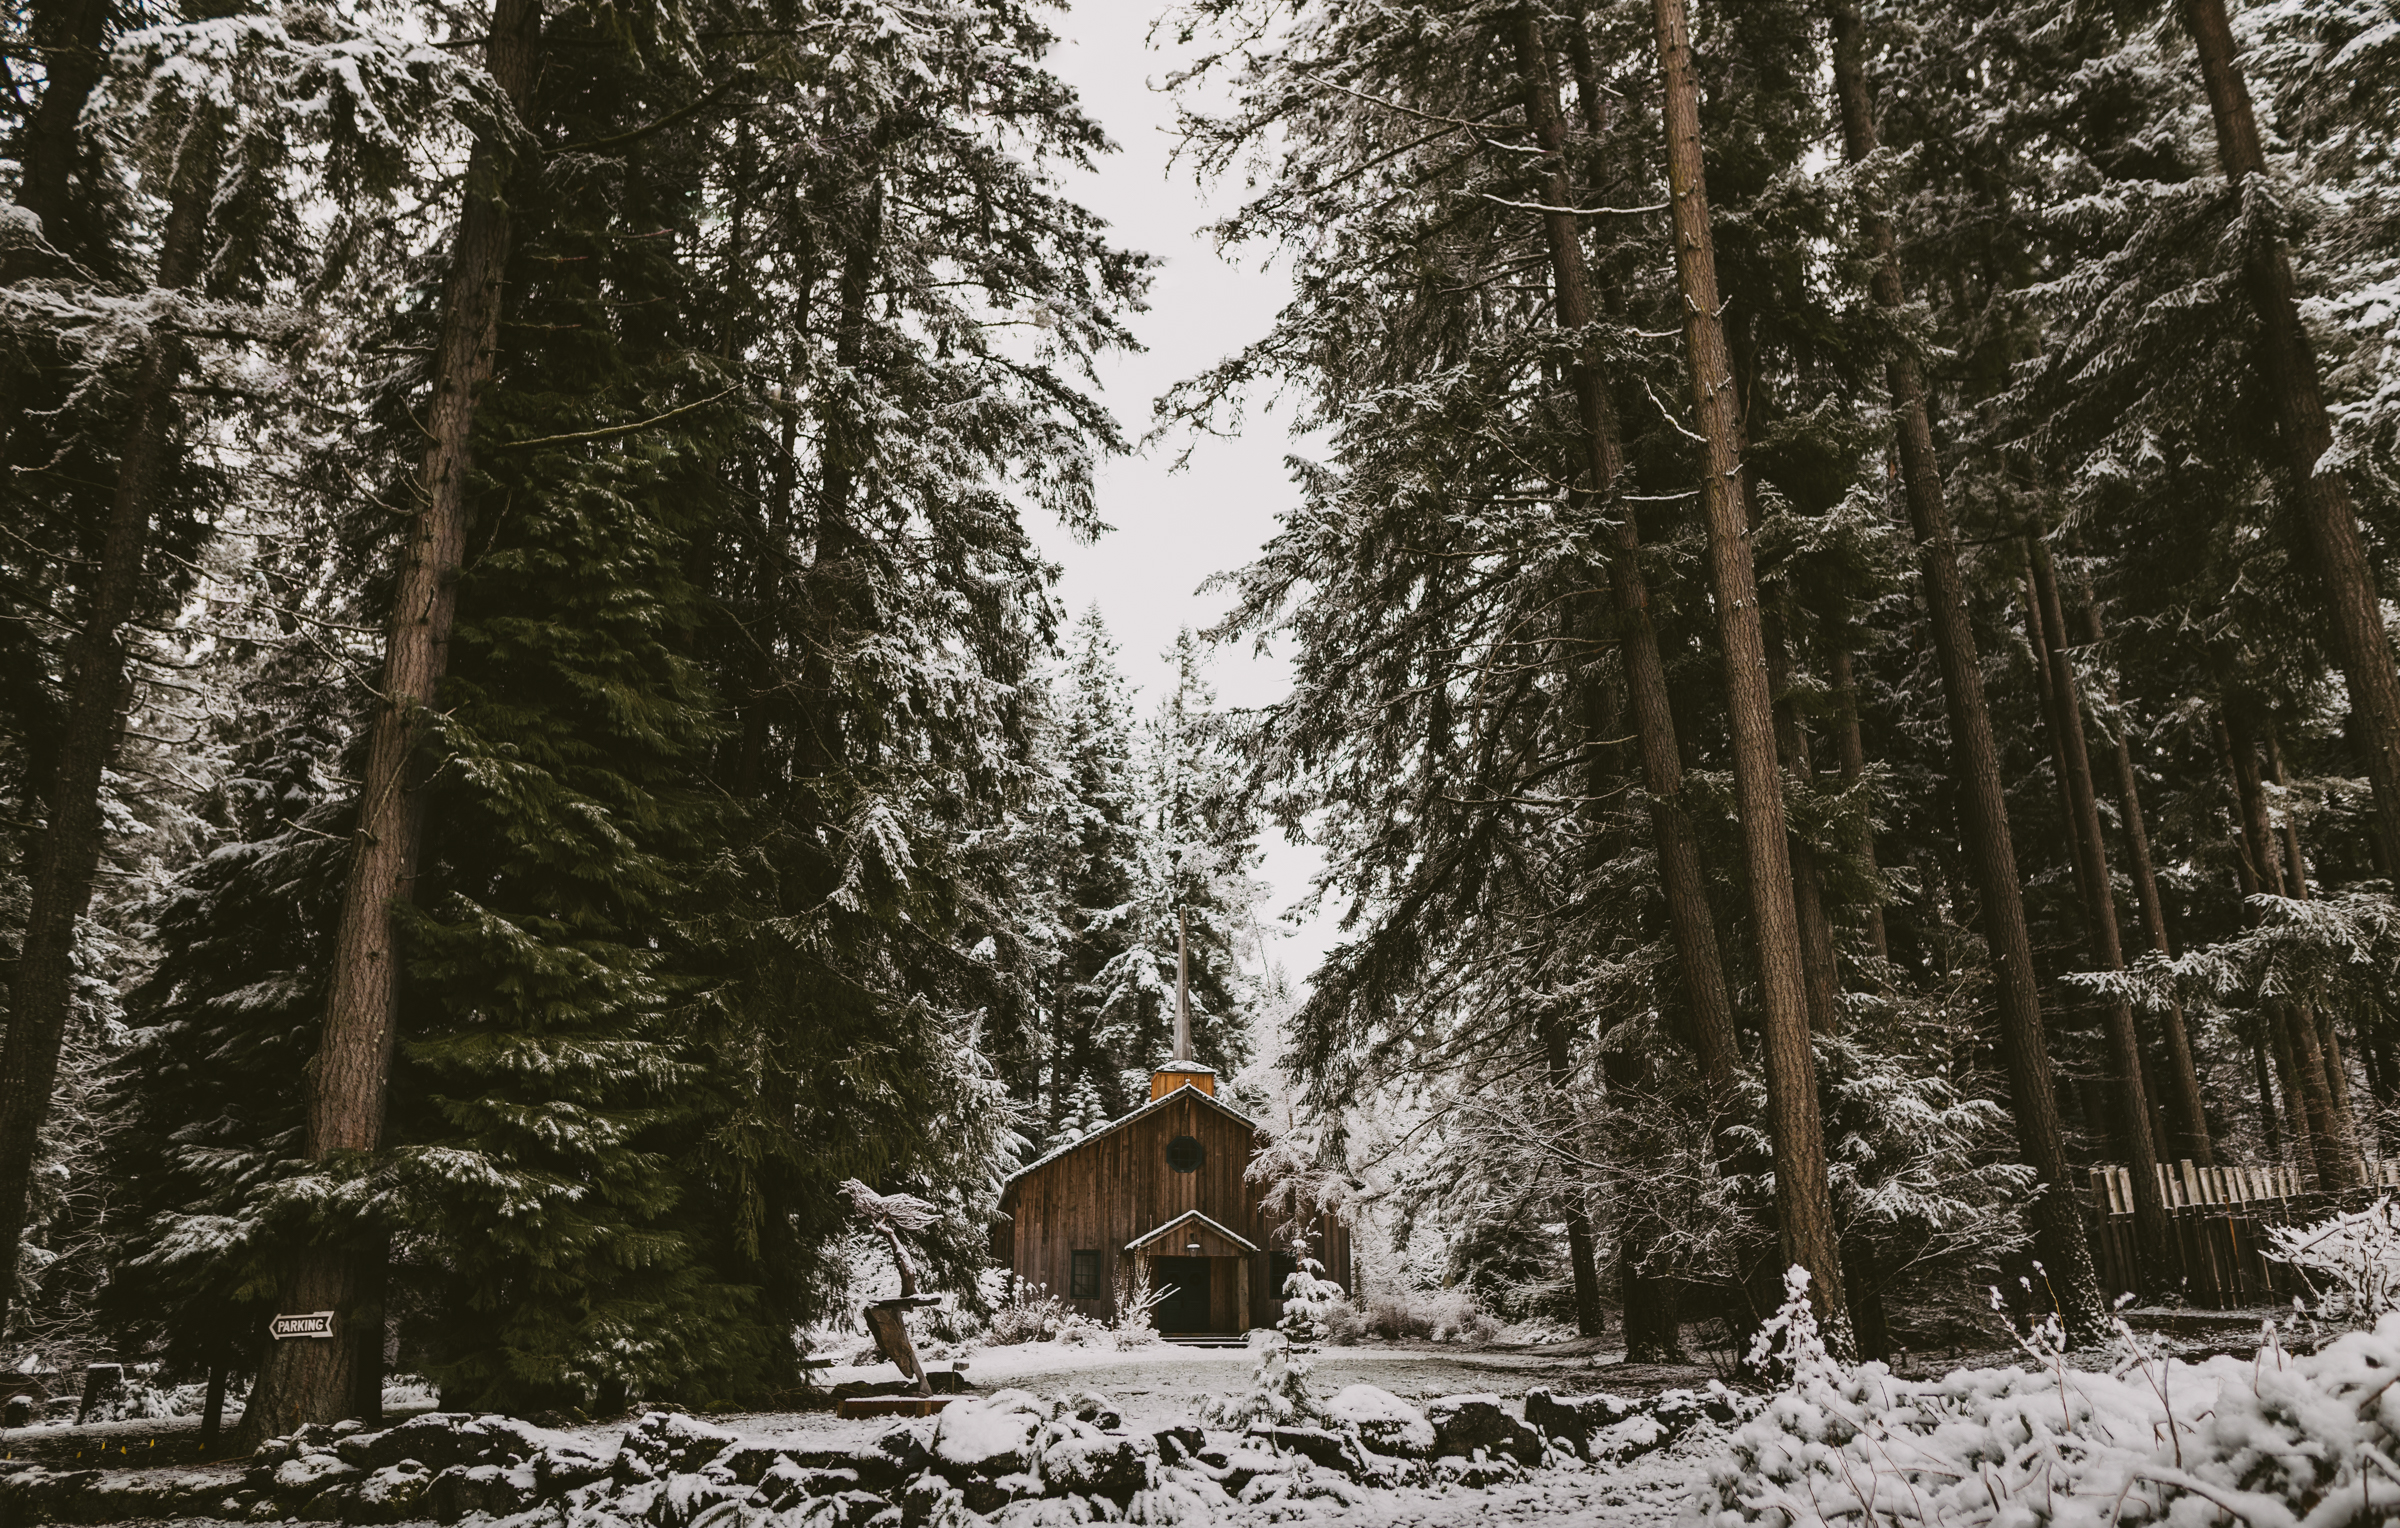 © Isaiah + Taylor Photography - Portland, Oregon Winter Forest Cabin Engagement-2.jpg